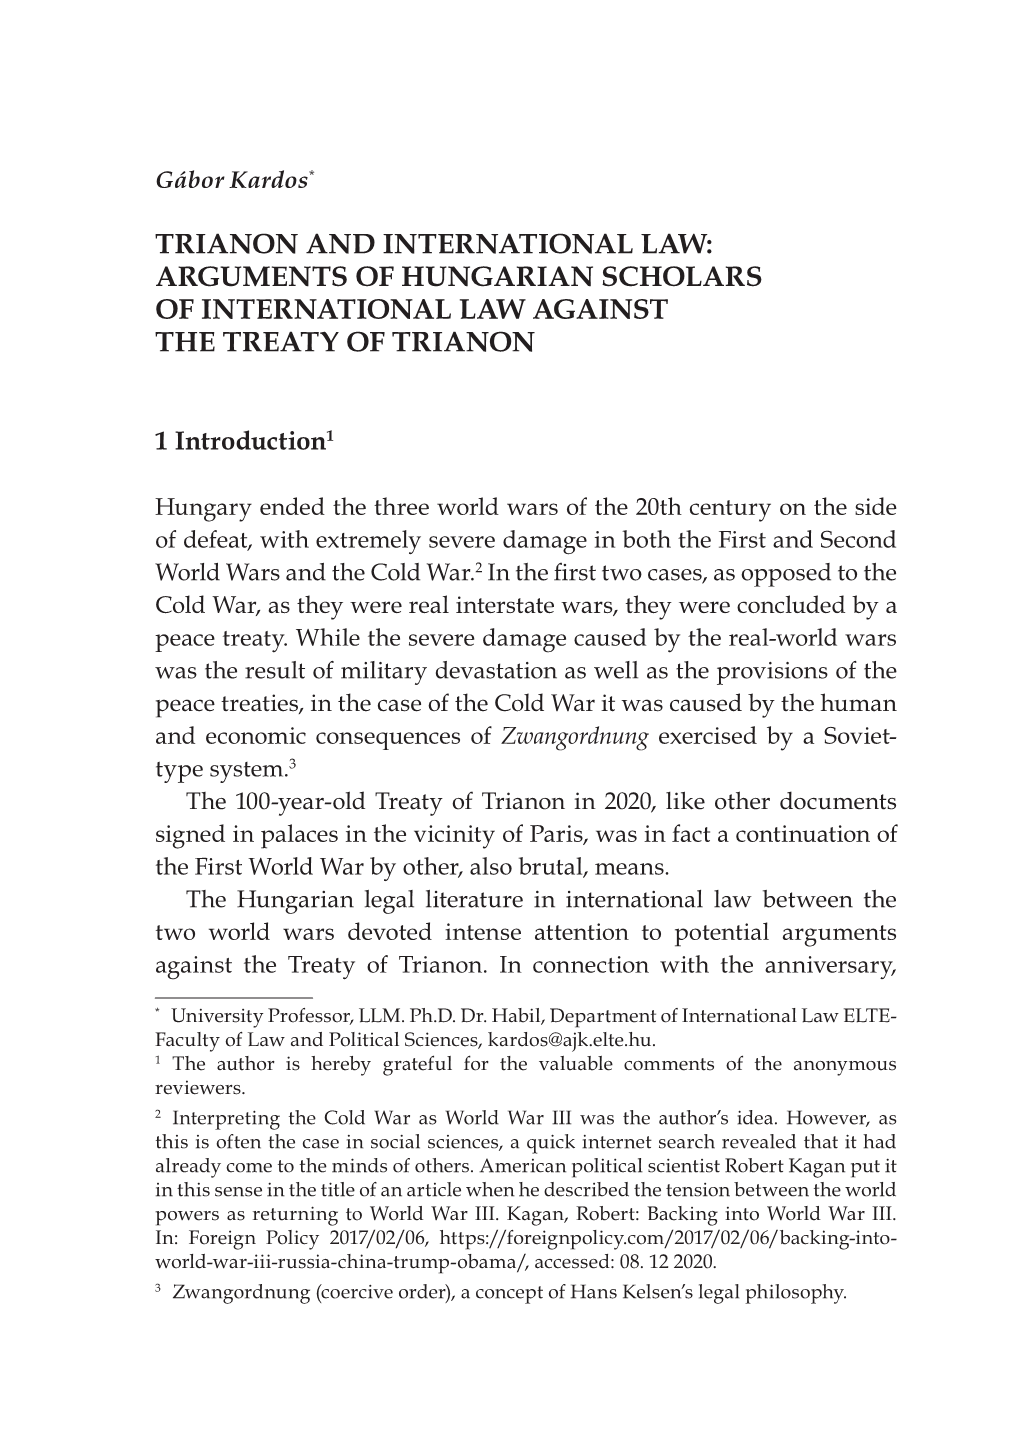 Trianon and International Law: Arguments of Hungarian Scholars of International Law Against the Treaty of Trianon